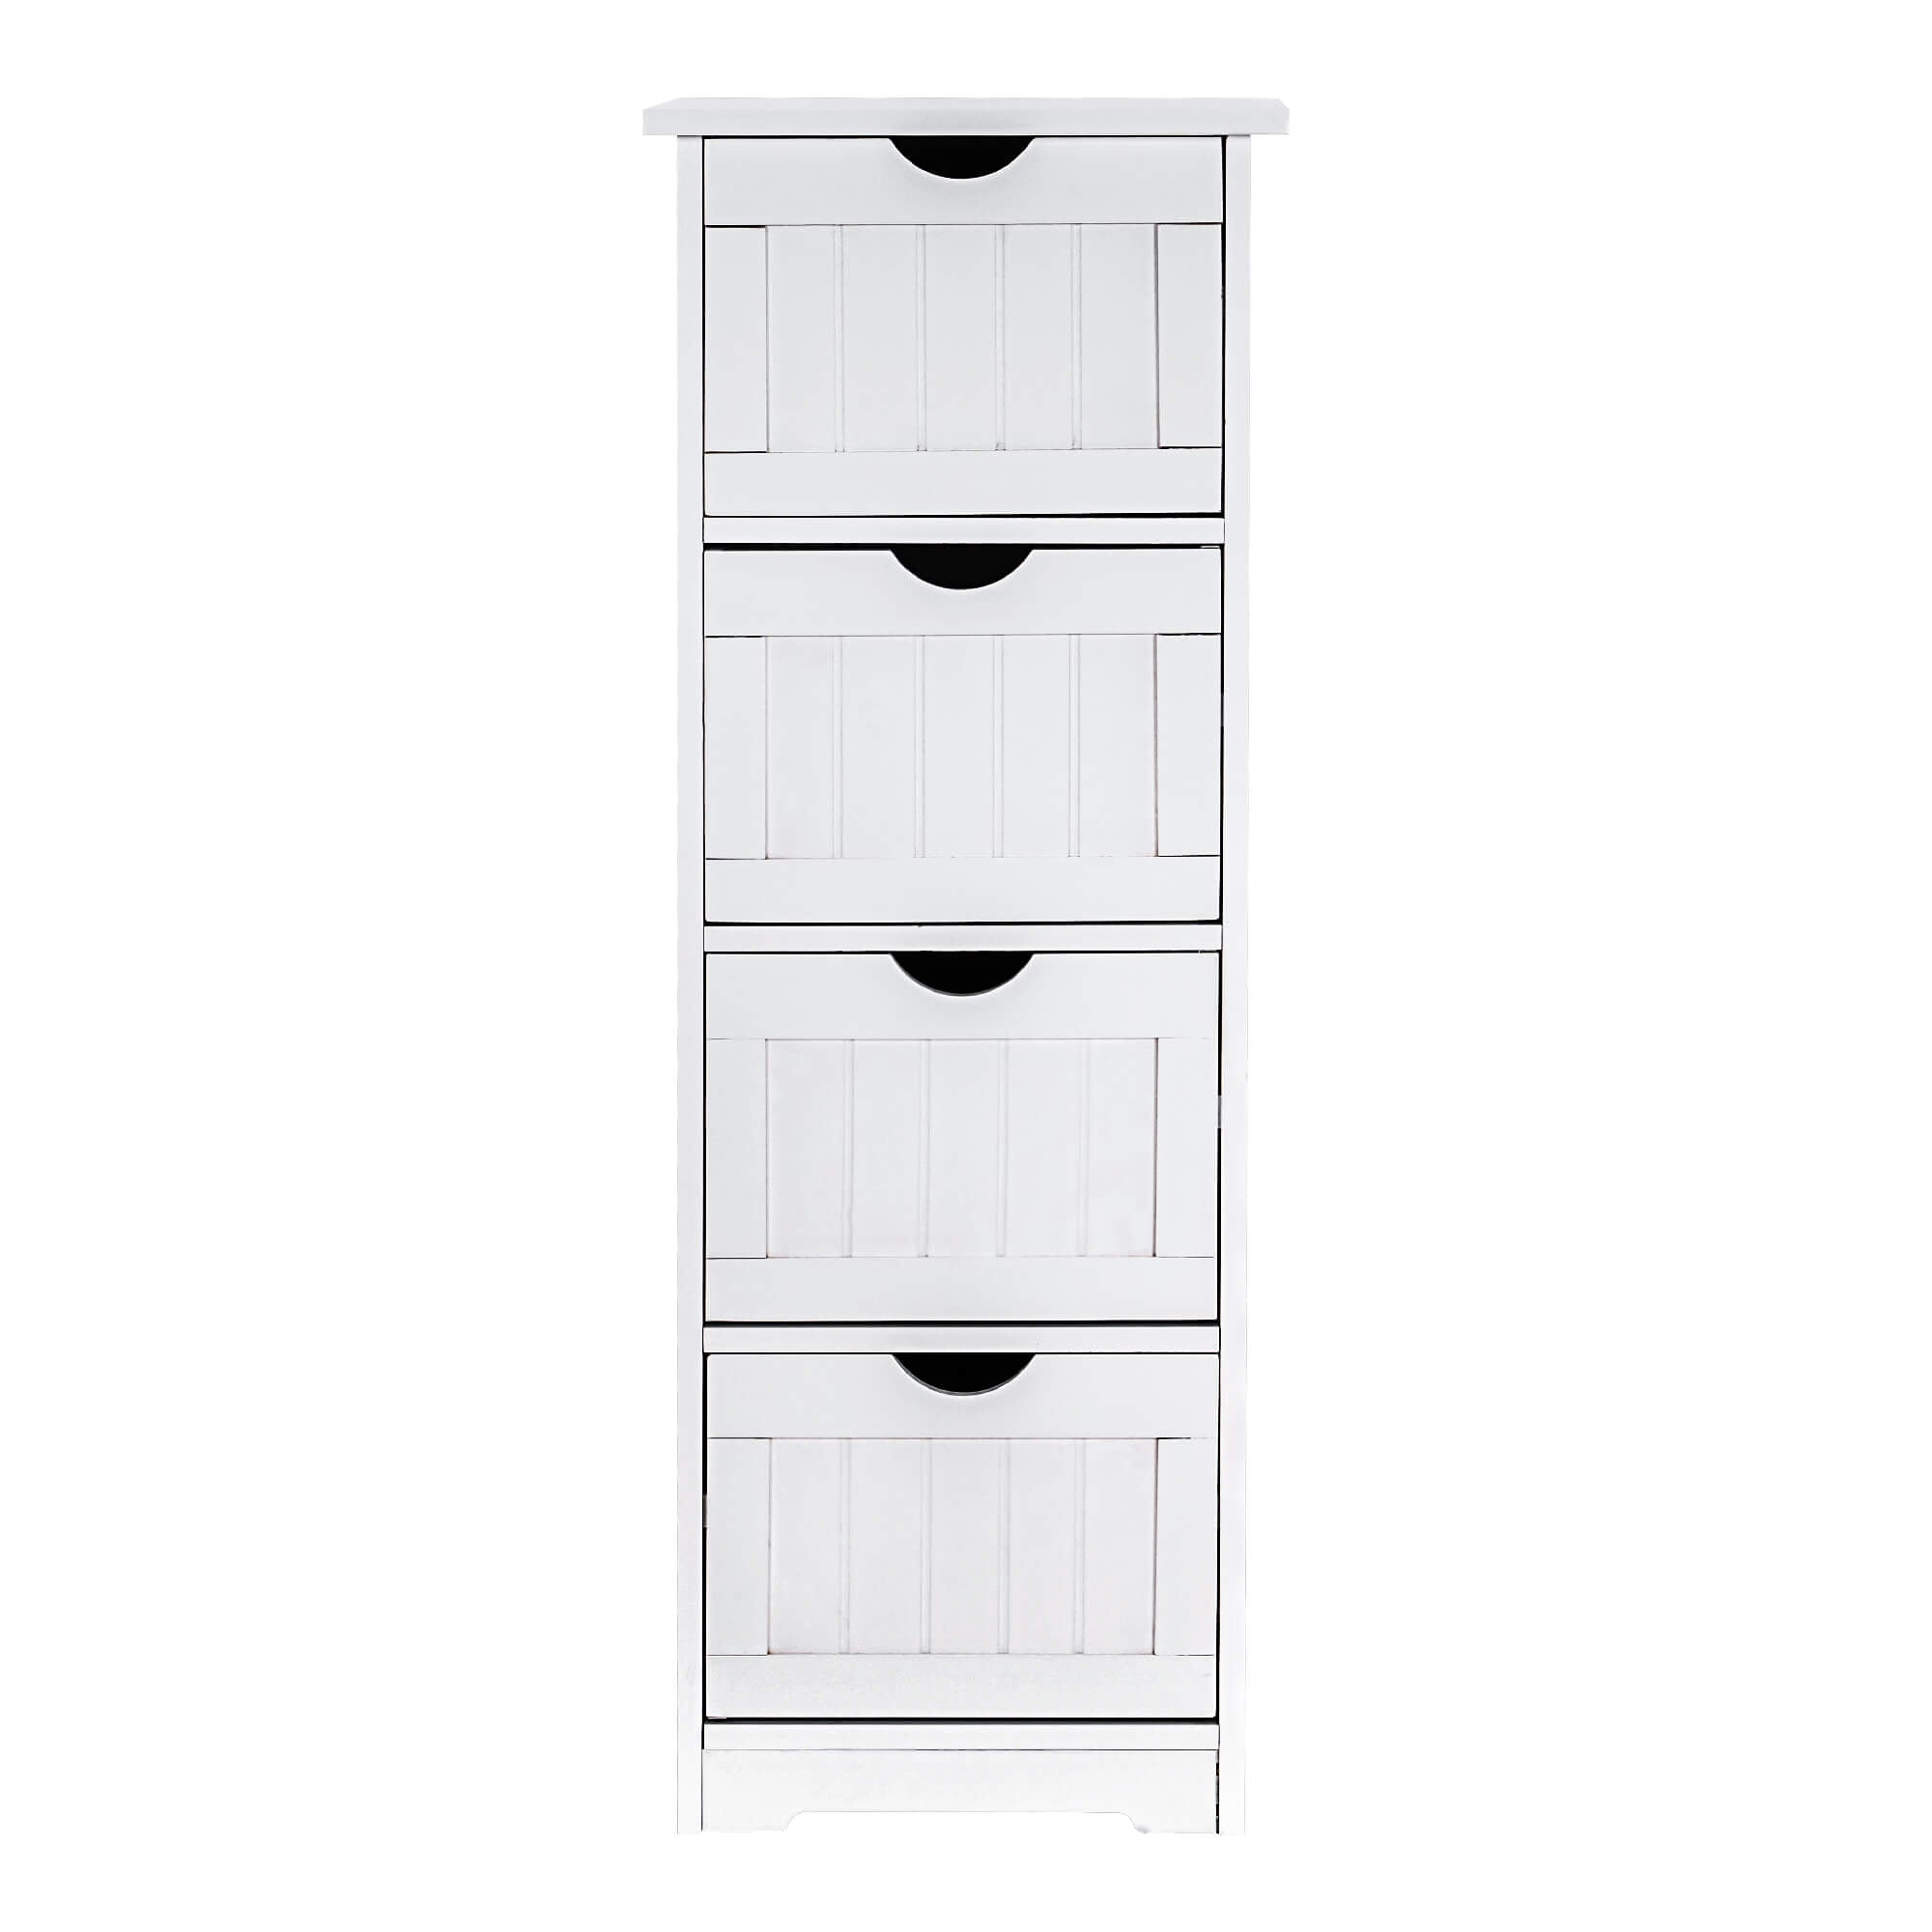 Ivinta Small Bathroom Storage Cabinets Free Standing with 4 Drawers